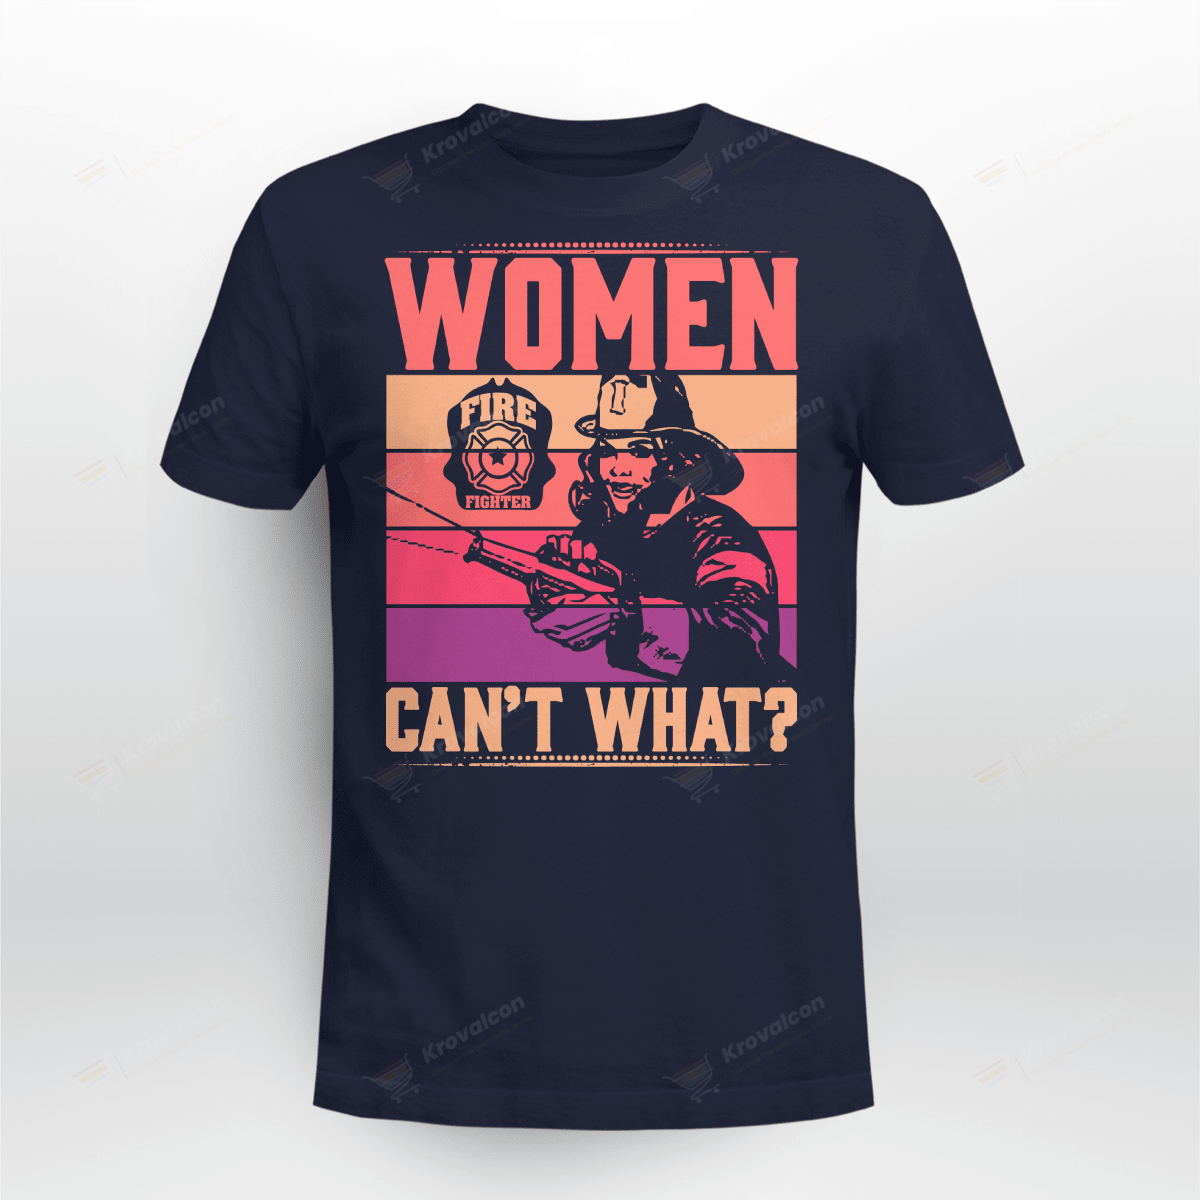 WOMEN CAN'T WHAT